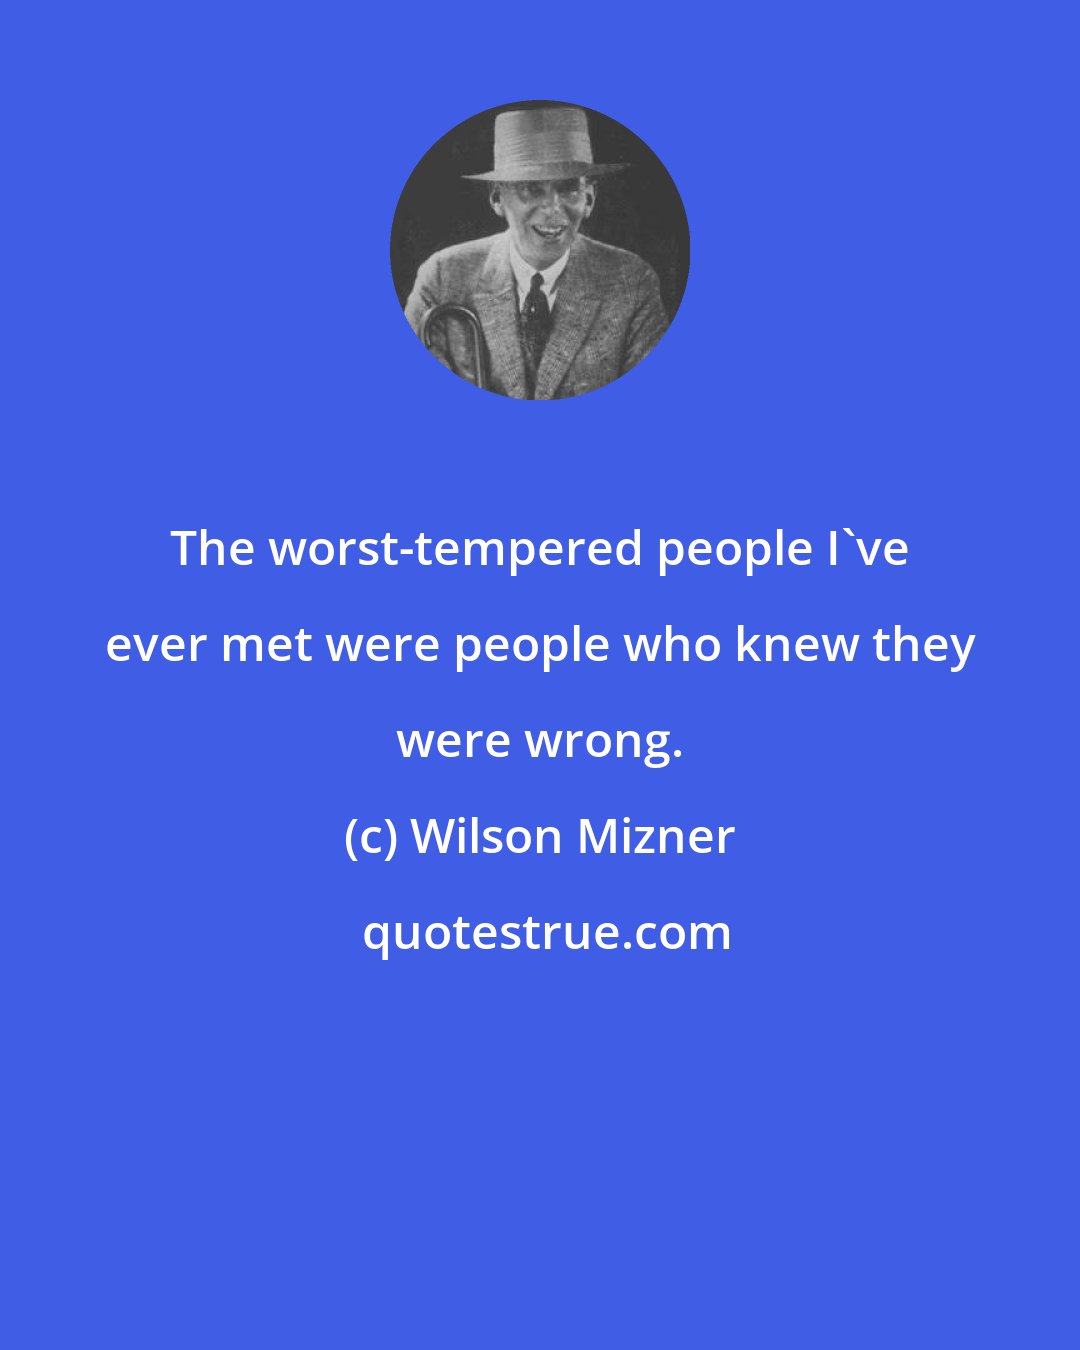 Wilson Mizner: The worst-tempered people I've ever met were people who knew they were wrong.